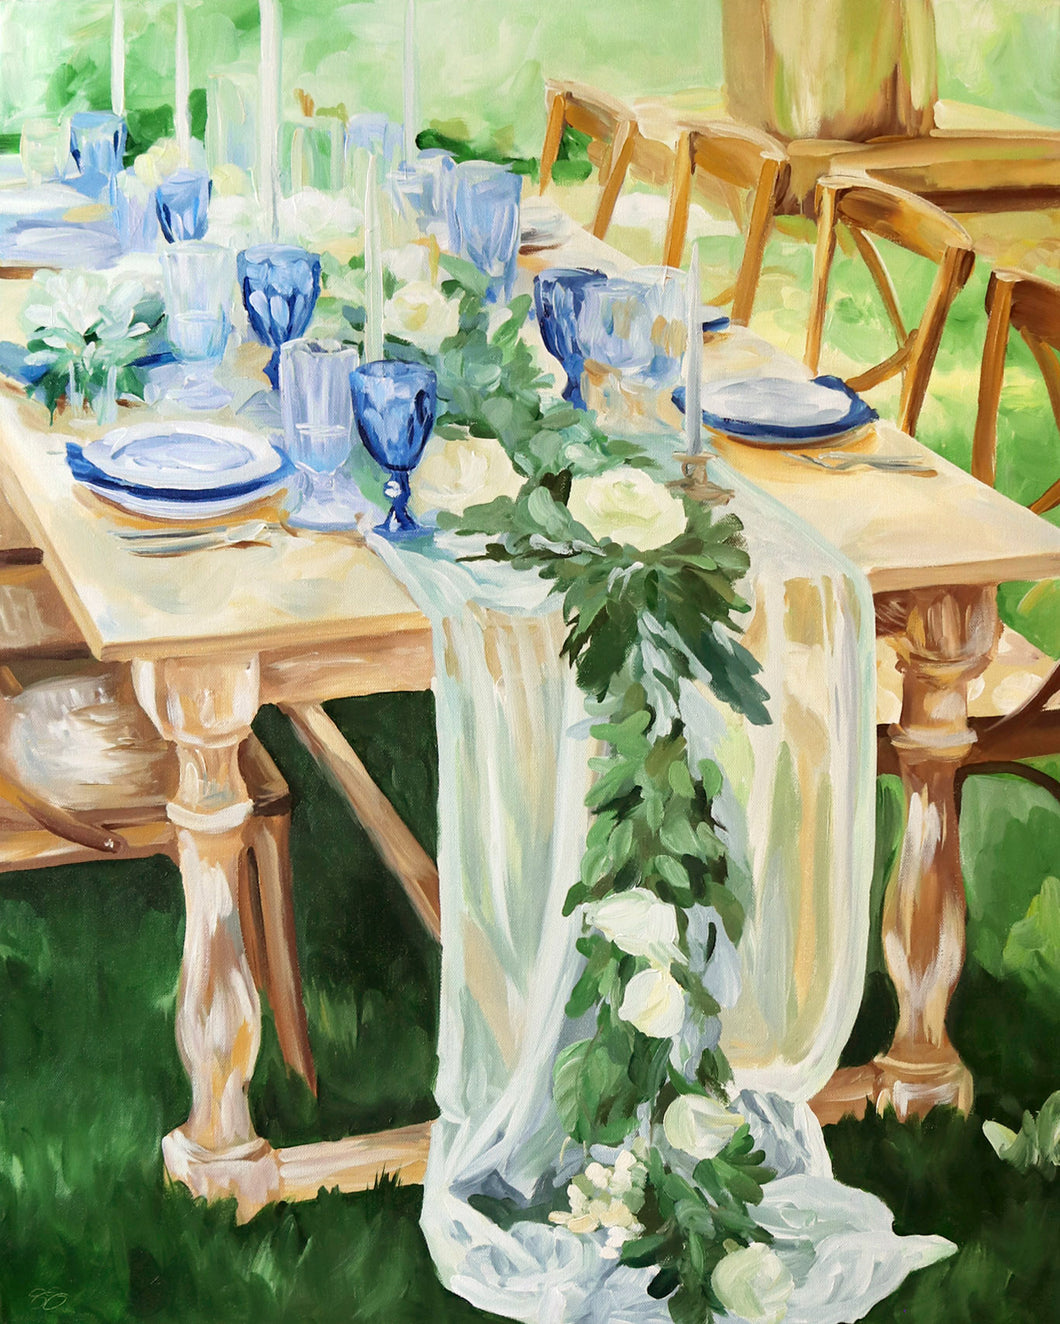 Elizabeth Alice Studio original acrylic painting, art of a tablescape, outdoor dining, wedding rustic table with flowers cascading down the side. Green blue white painting art. Garden Luncheon.